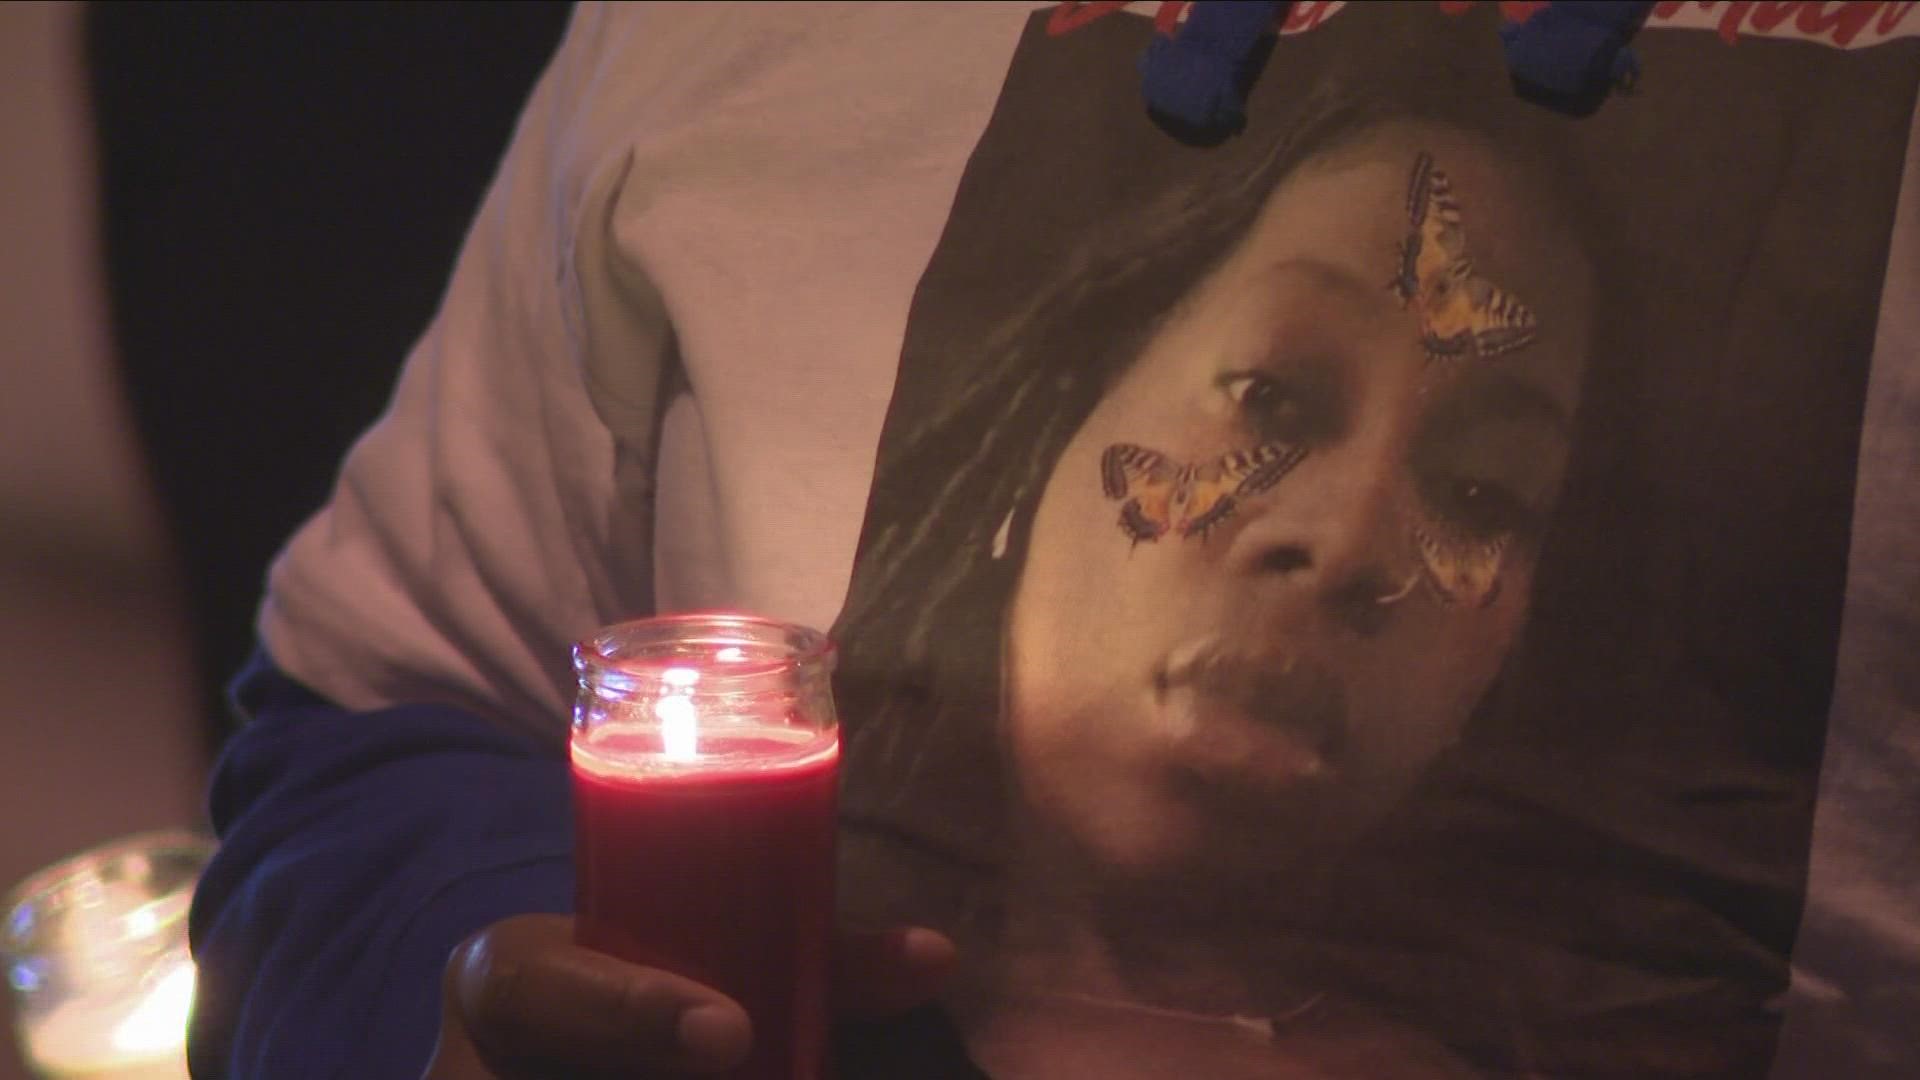 A vigil was held for 22-year-old Anndel Taylor, who died in her car, waiting for help during the December blizzard. 40 deaths were associated with the storm.